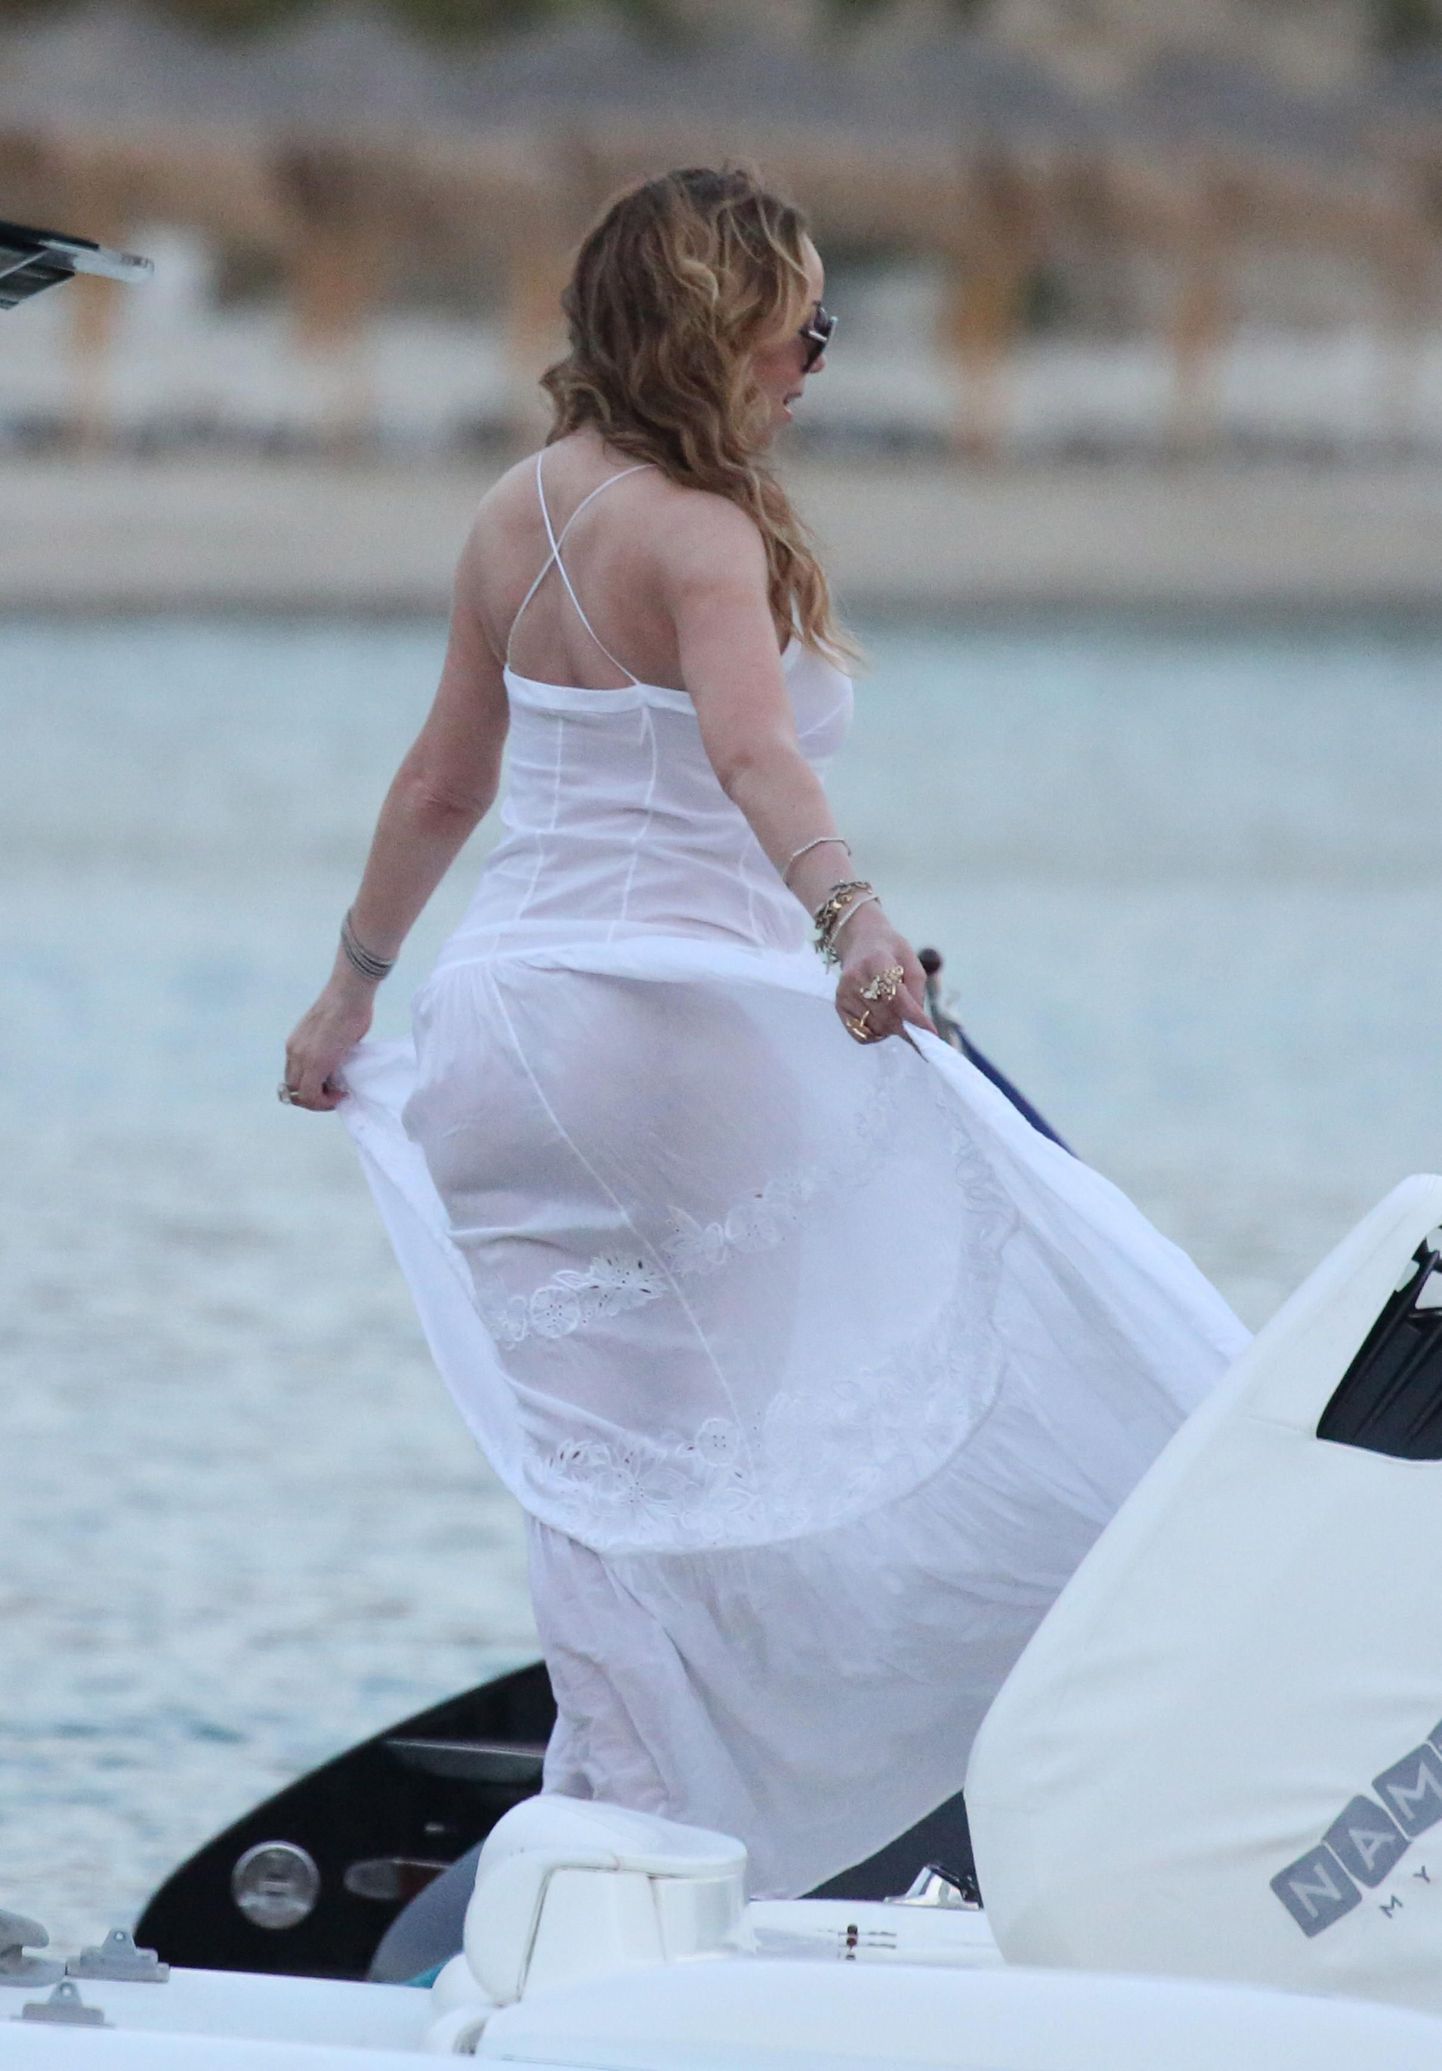 MAVRIXONLINE.COM - WORLDWIDE GREECE OUT - NO WEB USE UNLESS FEES AGREED - EXCLUSIVE!! POOL SET MAVRIXONLINE/LOOKPRESS - American singer Mariah Carey, her children and boyfriend James Packer arrive on a yacht in Mykonos for the second time. The couple was also spotted dining in a restaurant along with friends. Mariah was all smiles while she was out, looking gorgeous in a flowing white dress. Mykonos, Greece. 22nd September 2016.
Fees must be agreed prior to publication.
Byline, credit, TV usage, web usage or linkback must read MAVRIXONLINE/LOOKPRESS.
Failure to byline correctly will incur double the agreed fee.
Tel: +1 305 542 9275.